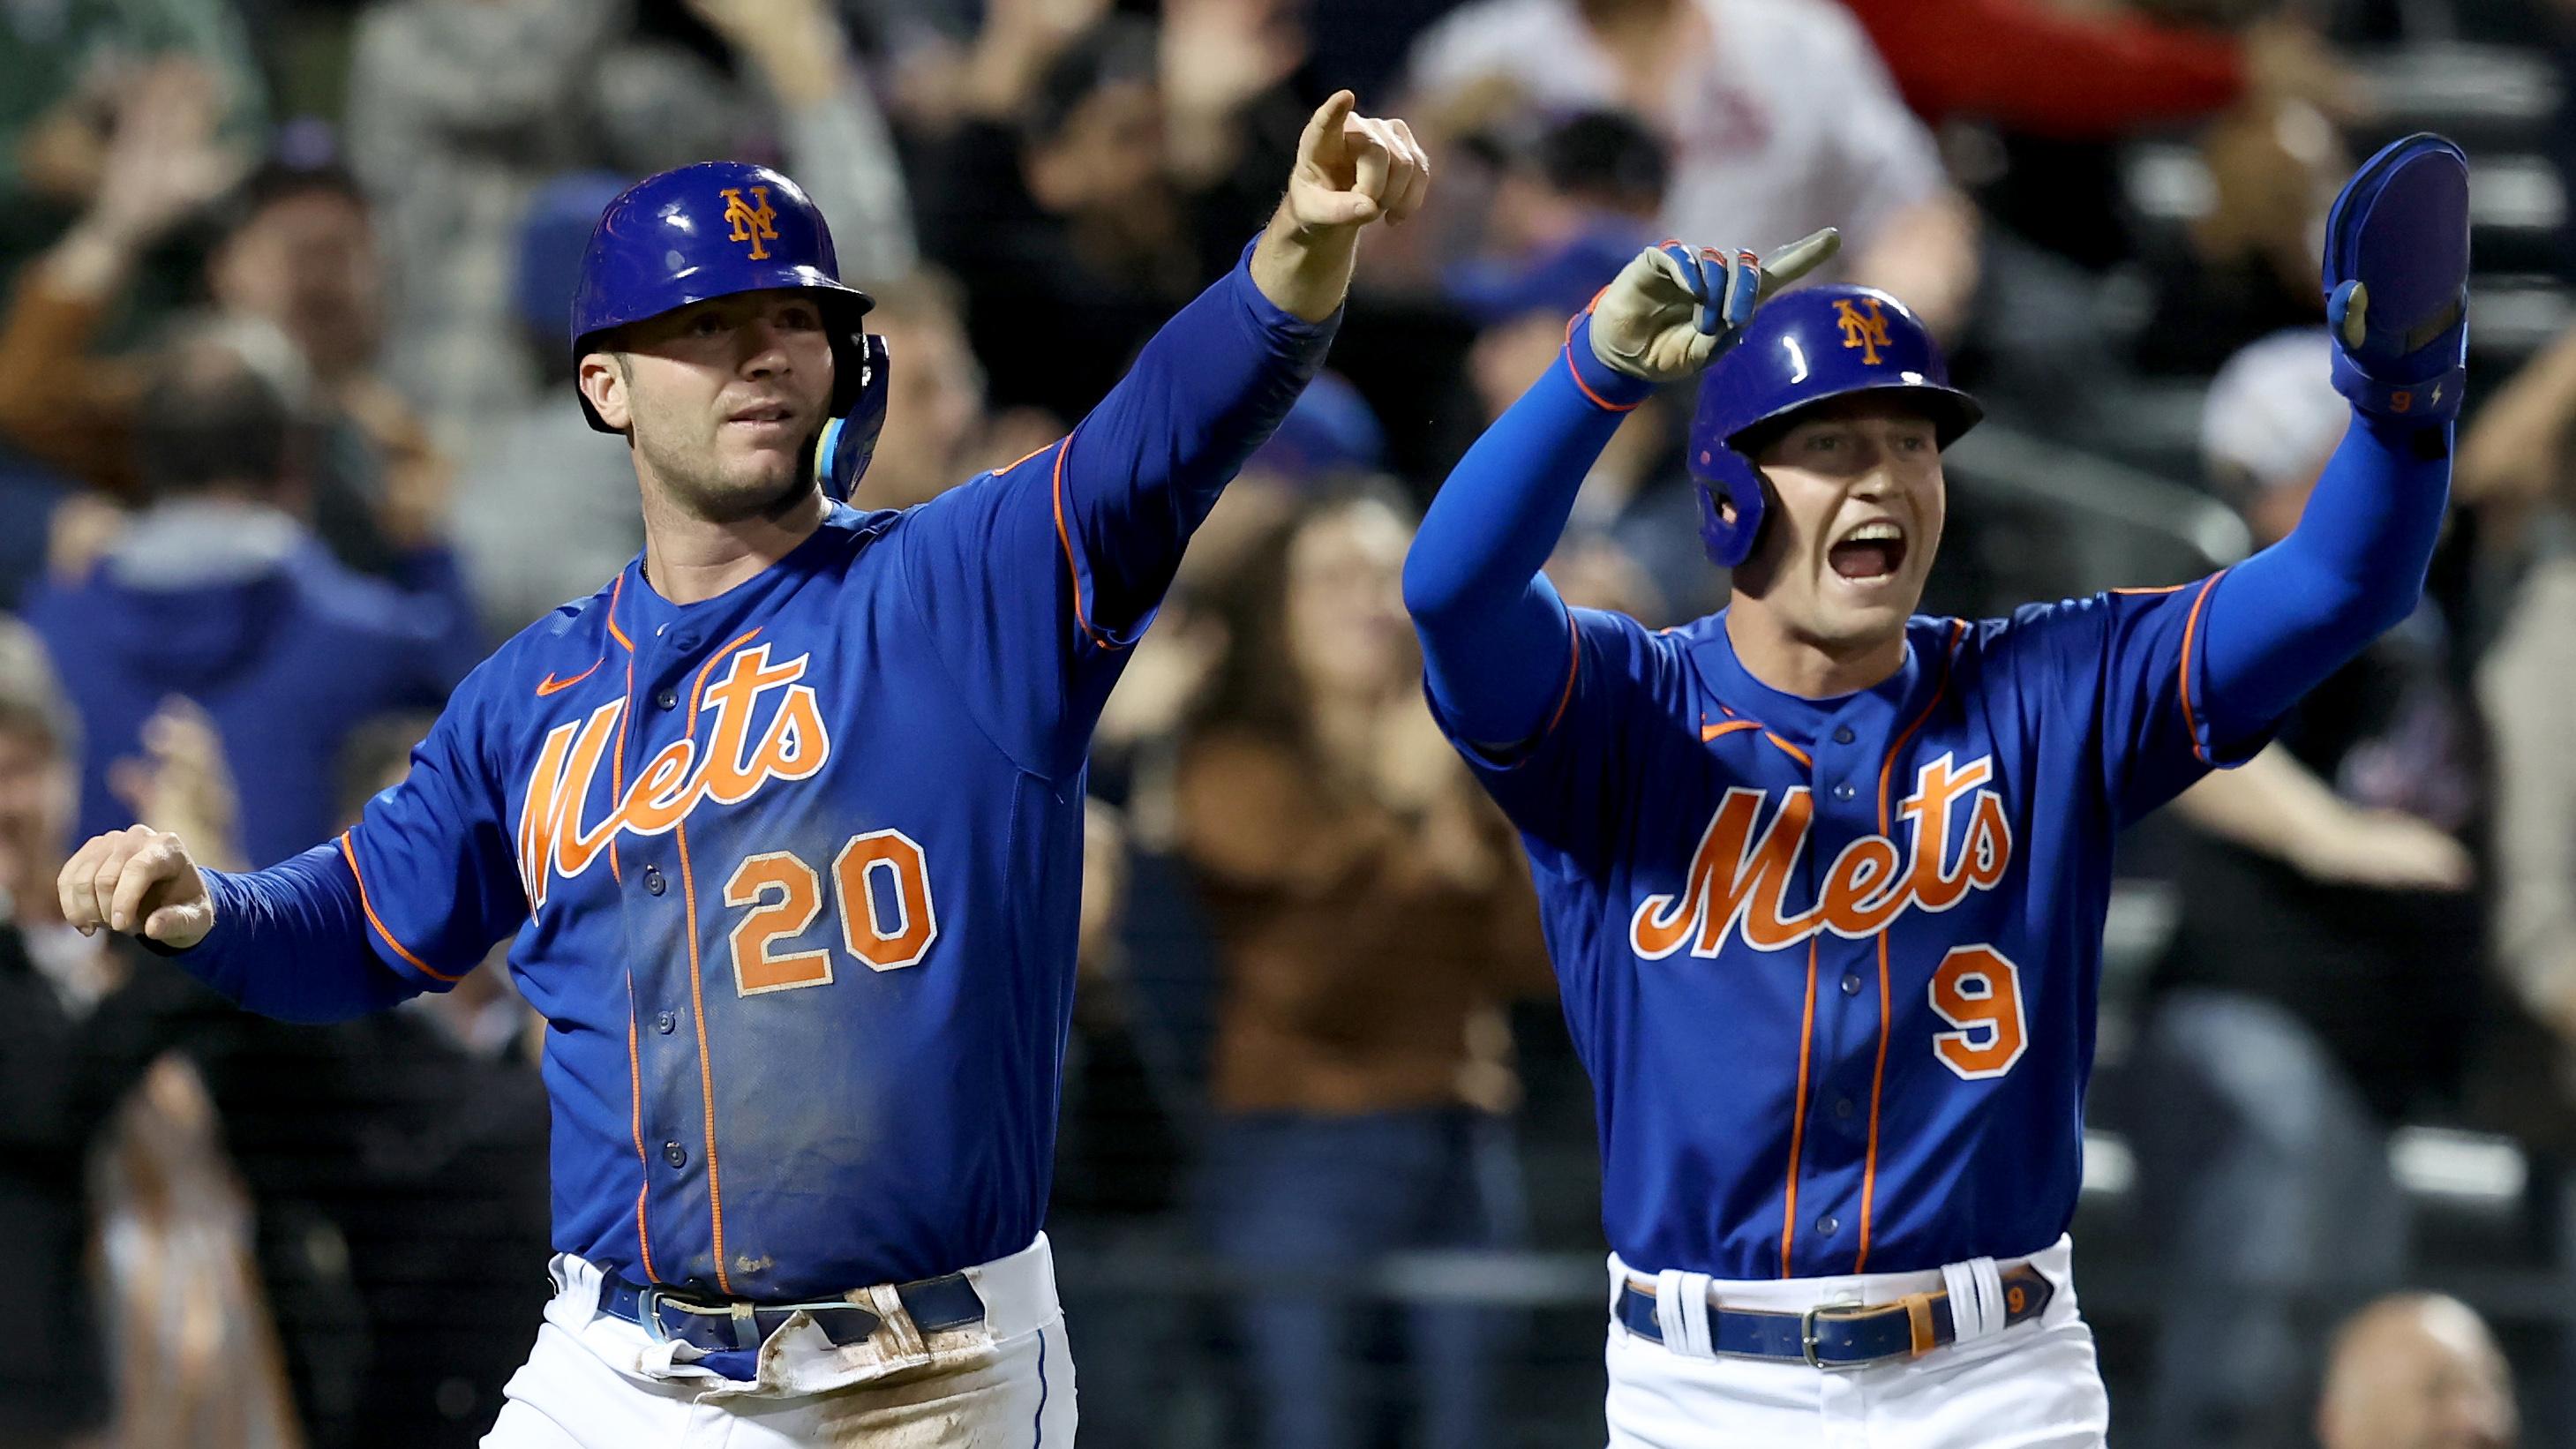 Pete Alonso and Brandon Nimmo / Brad Penner - USA TODAY Sports